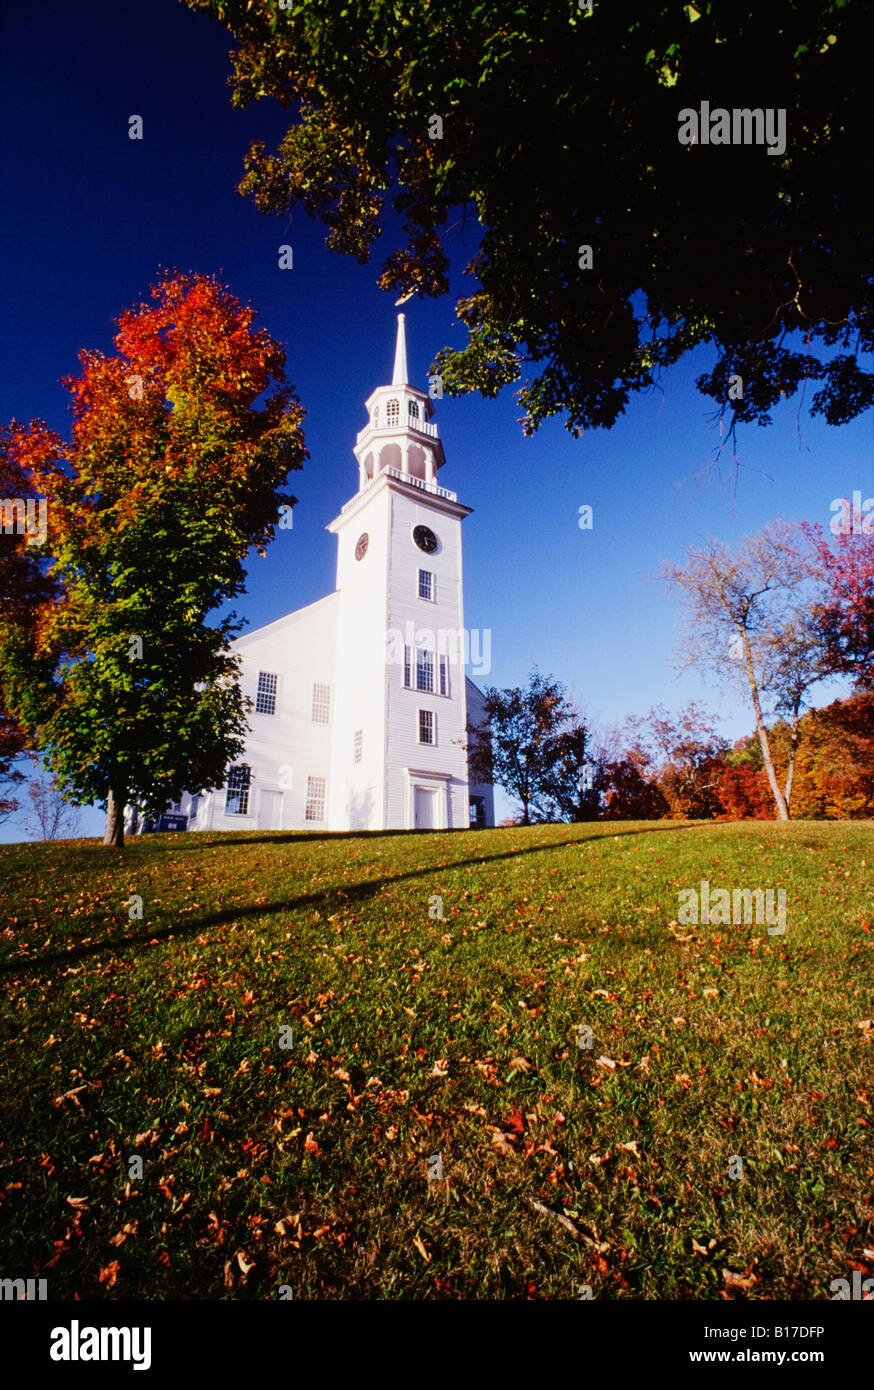 White church with steeple, Strafford, Vermont, USA Stock Photo